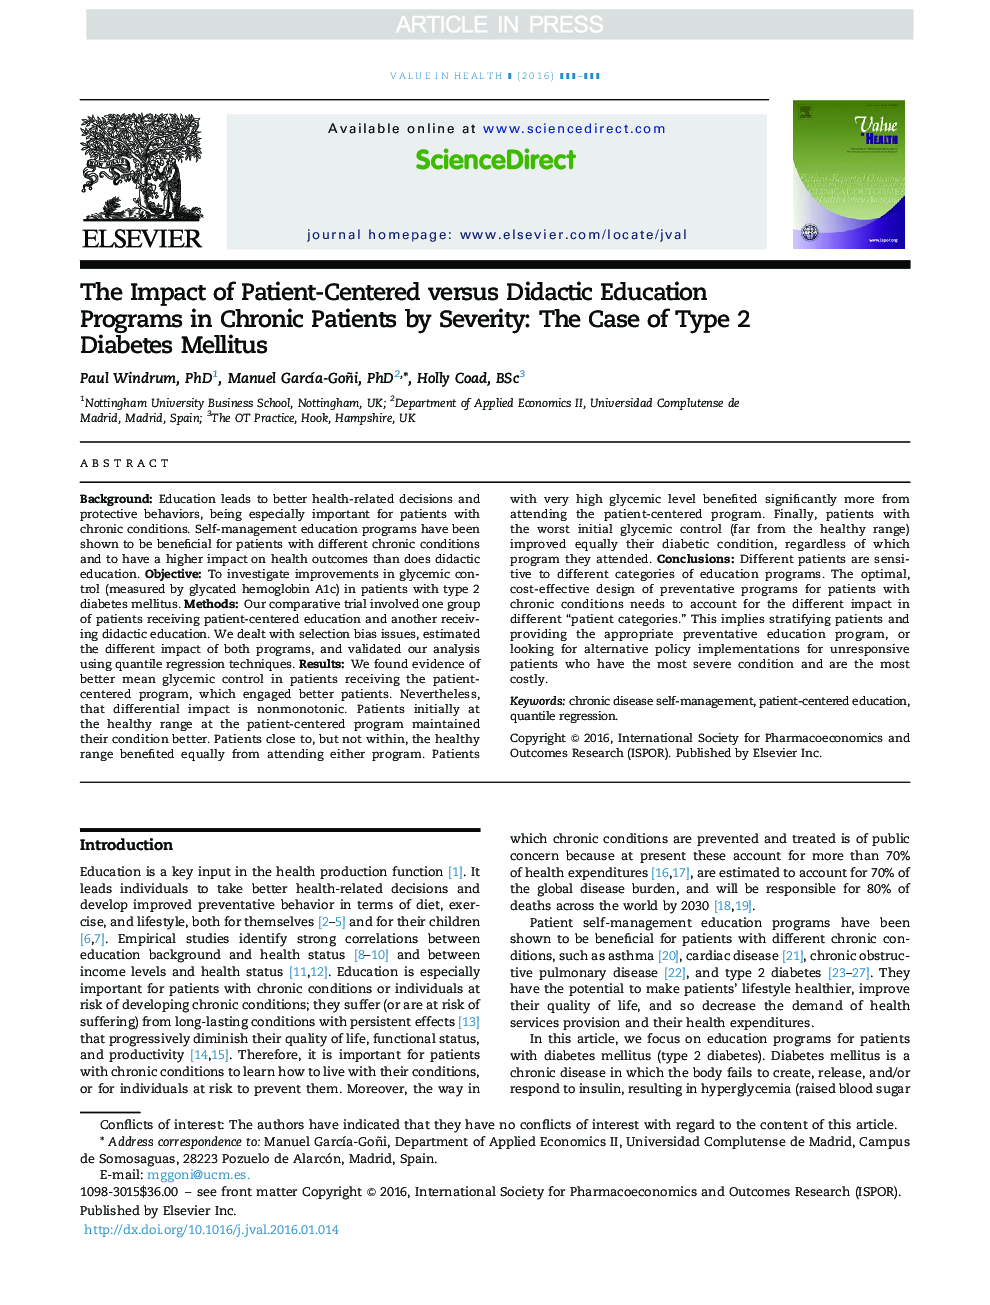 The Impact of Patient-Centered versus Didactic Education Programs in Chronic Patients by Severity: The Case of Type 2 Diabetes Mellitus